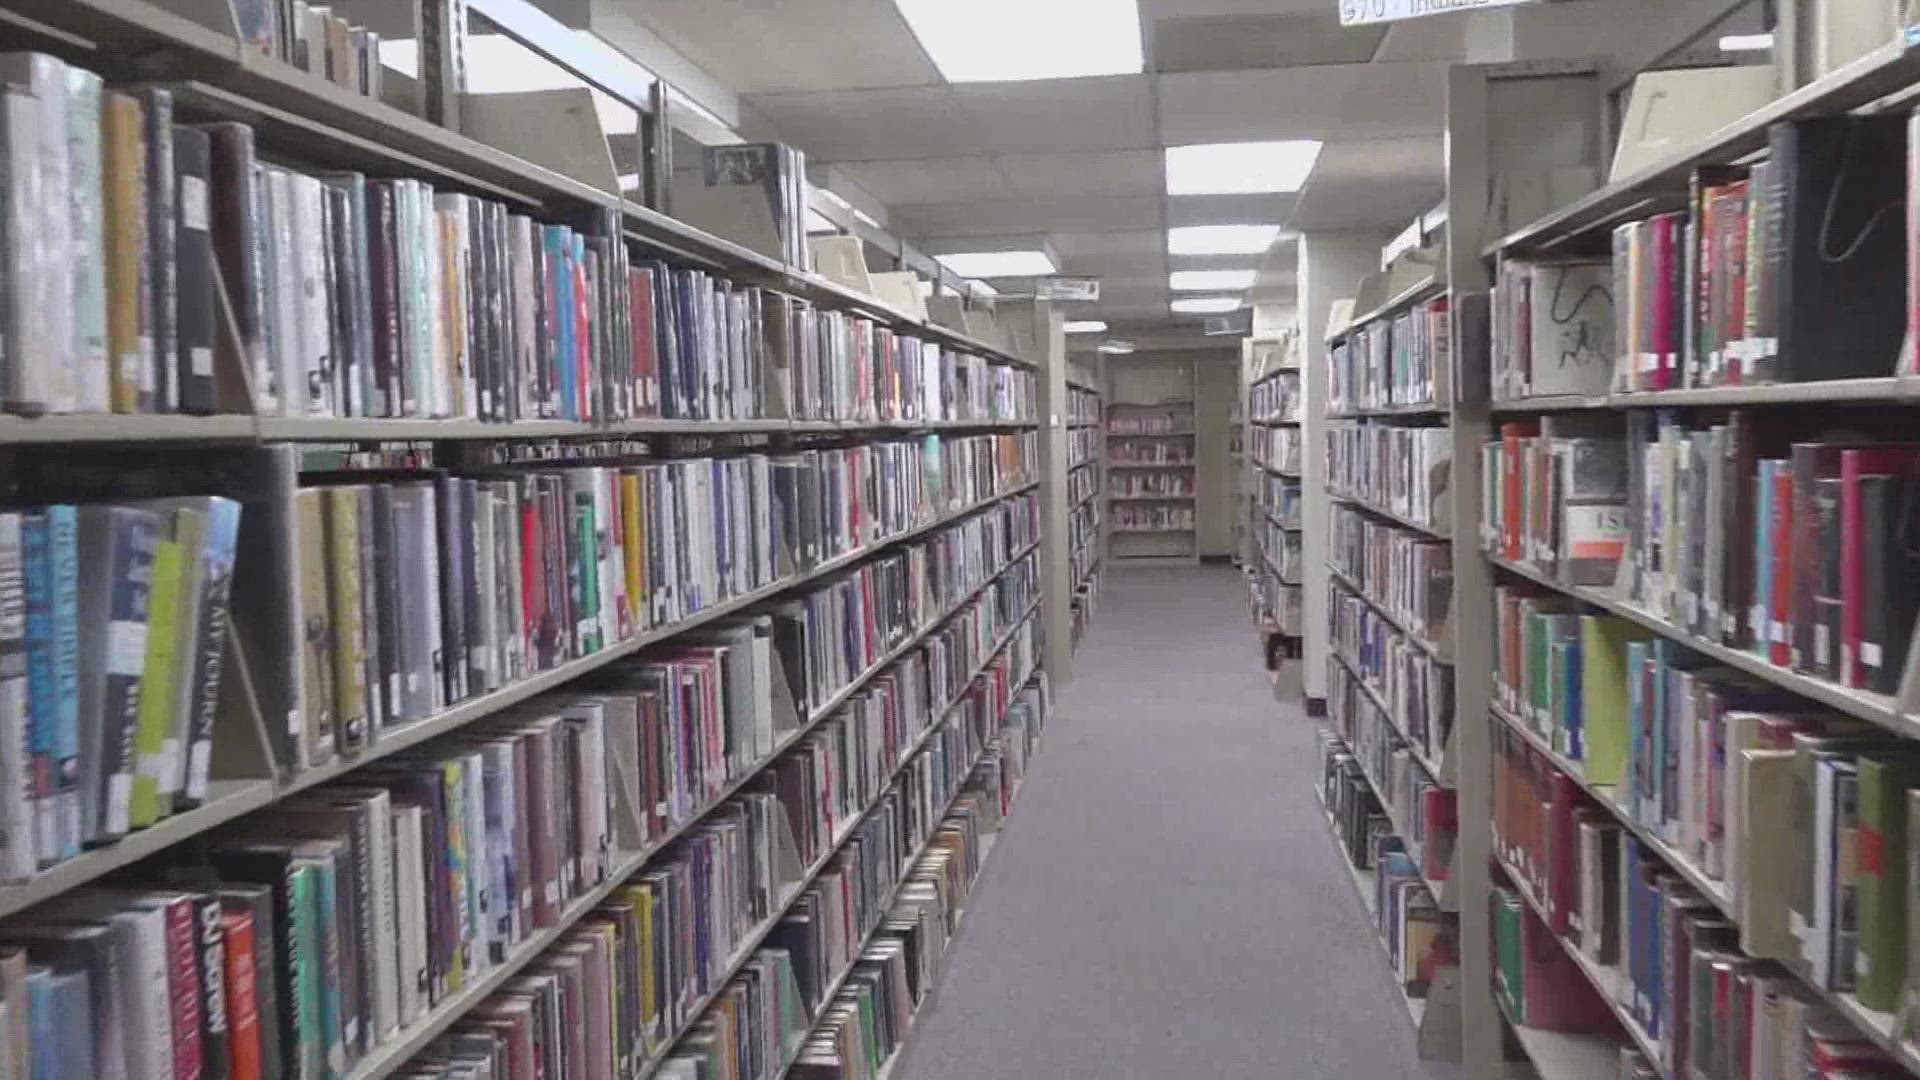 "We're not going to be done in the next year, but this is the farthest we've ever come in getting a new library."